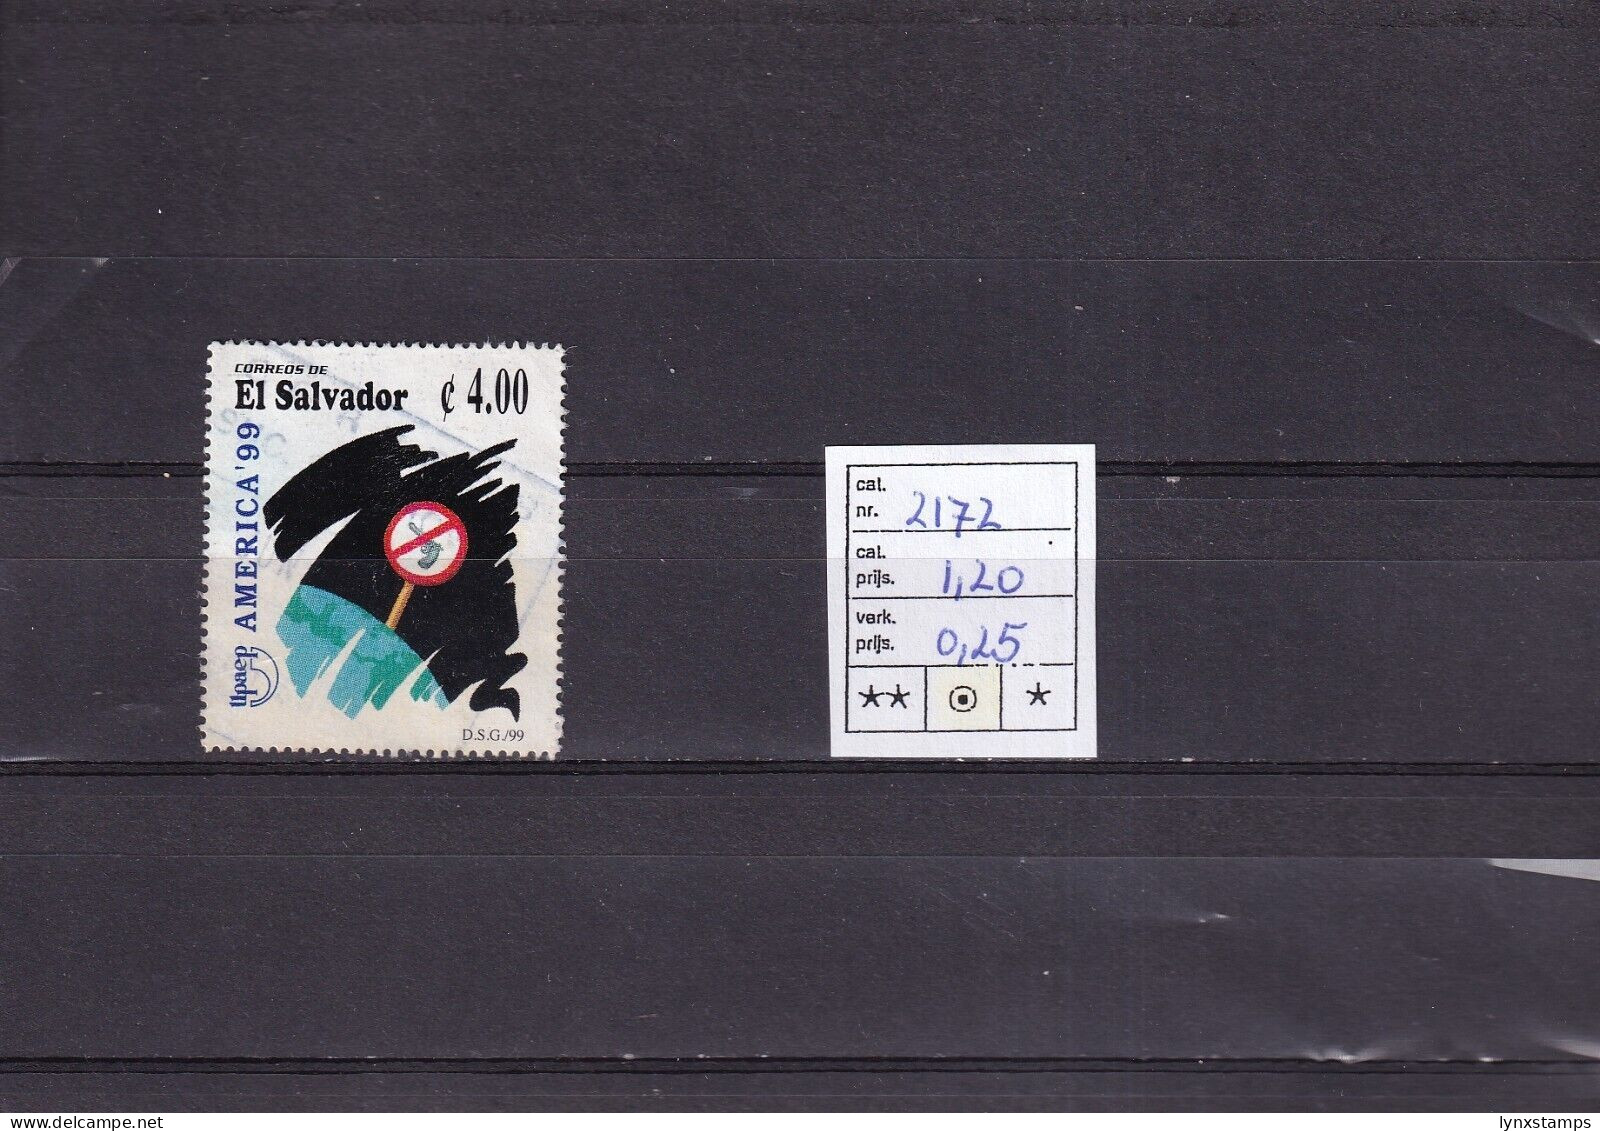 ER03 El Salvador 1999 The New Millennium Without Weapons - Used Stamp - Salvador